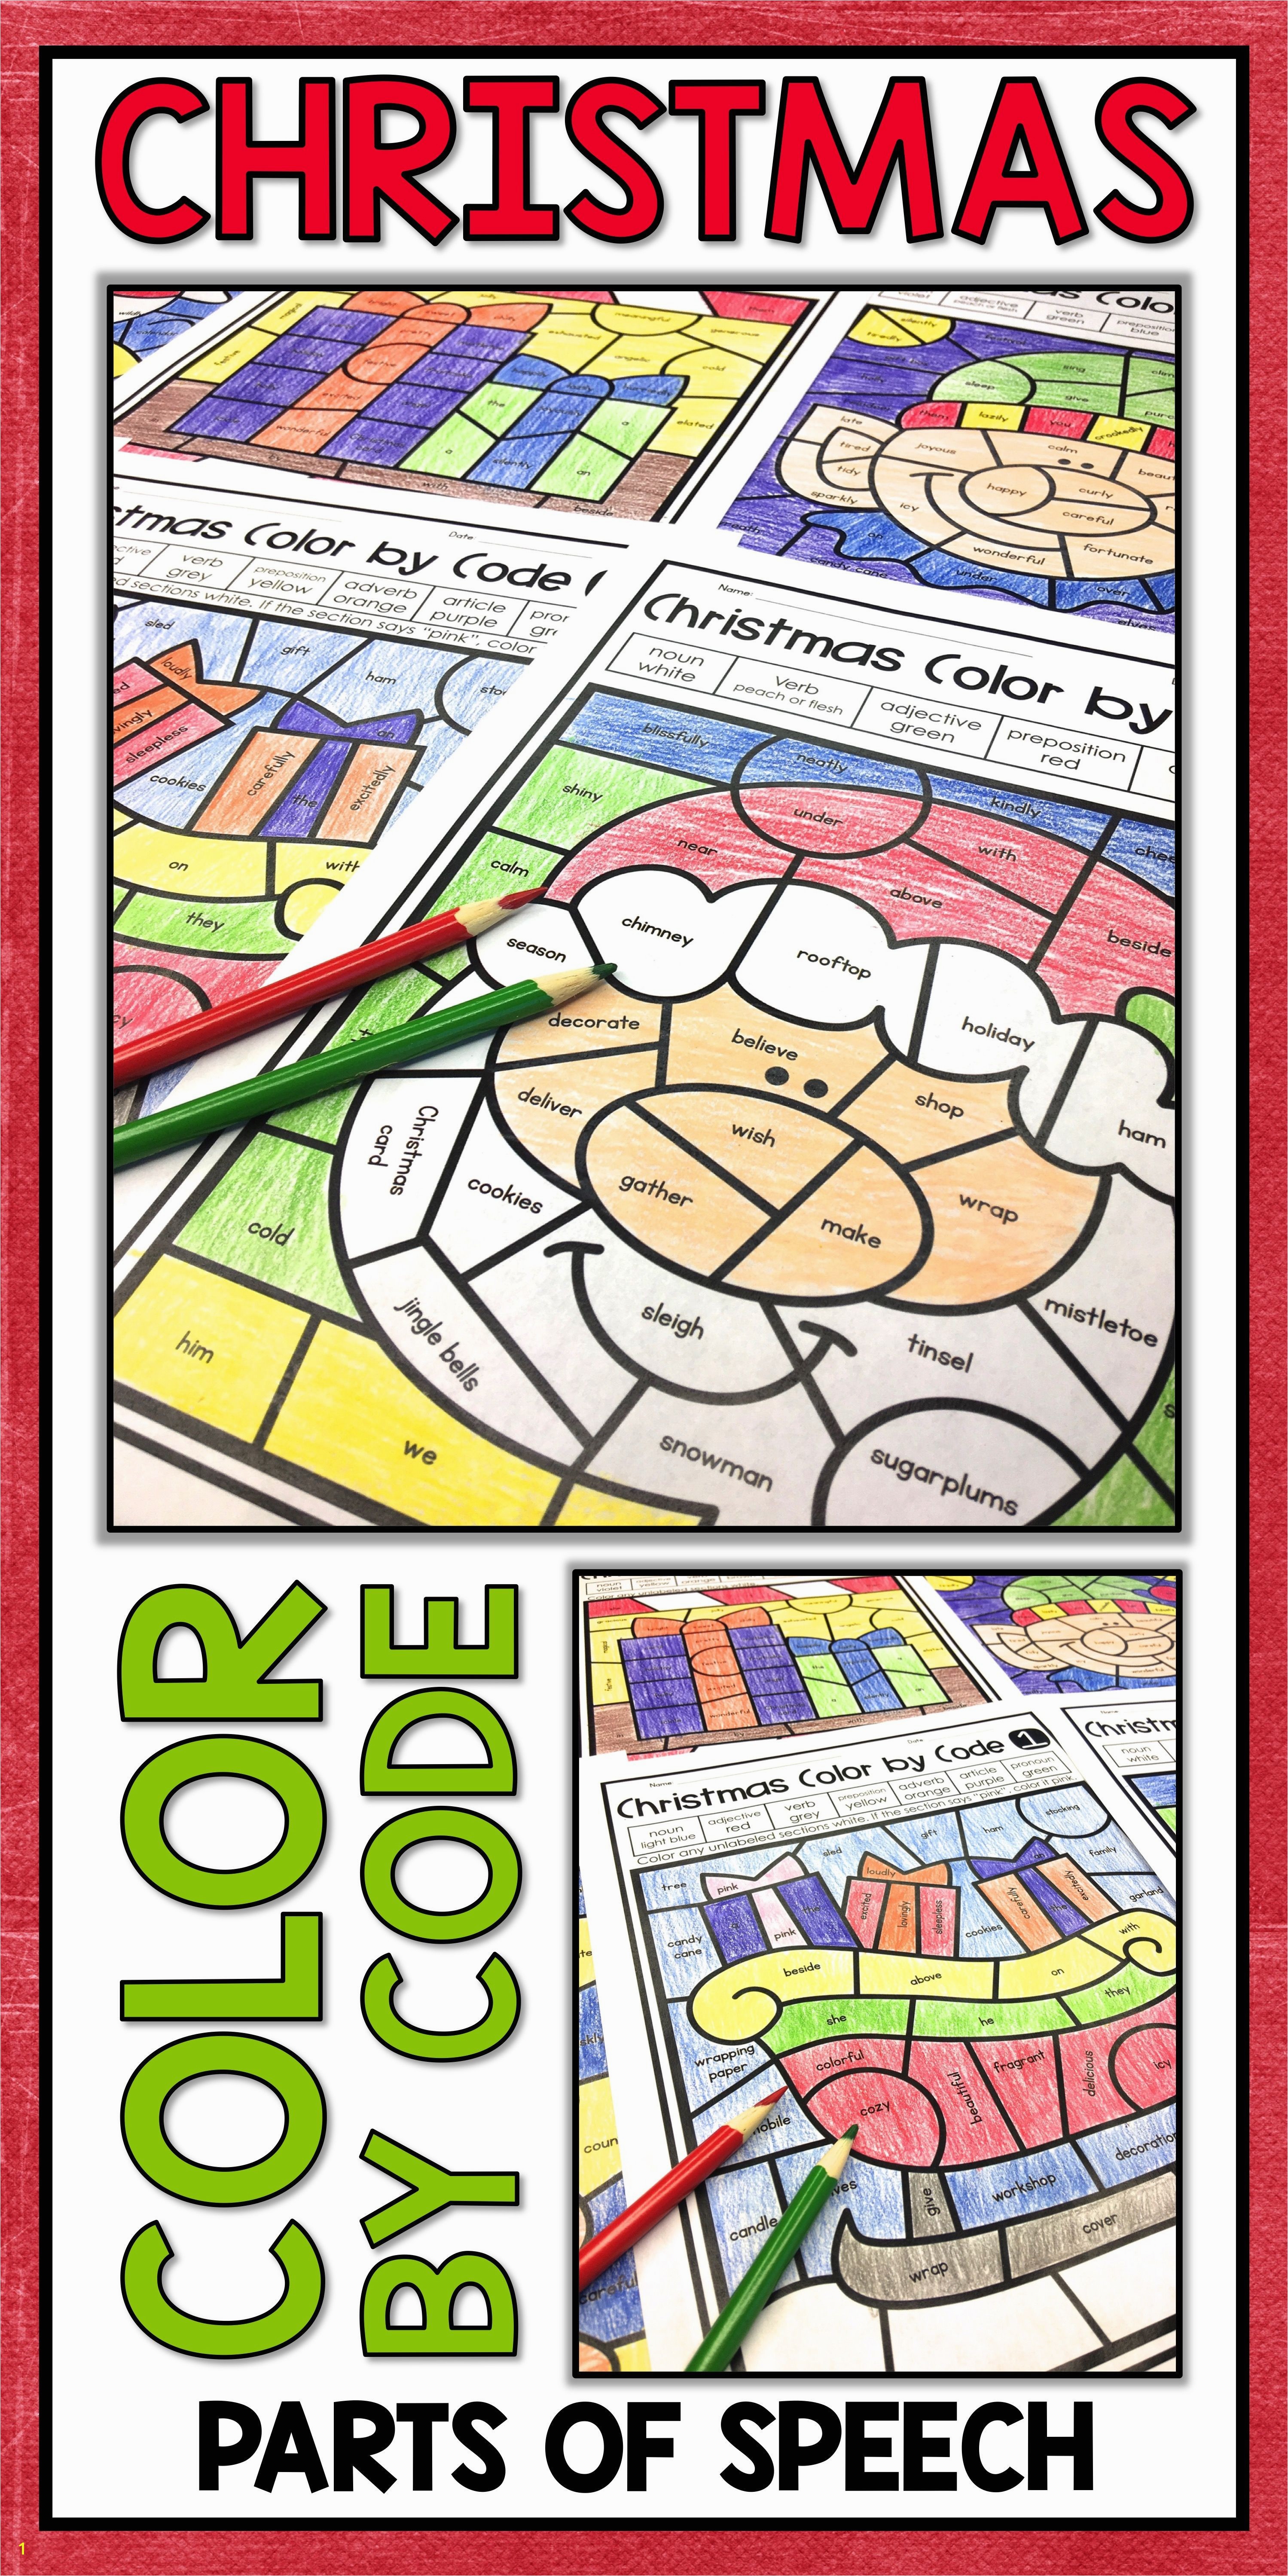 Preposition Coloring Pages 15 Awesome Preposition Coloring Pages Gallery